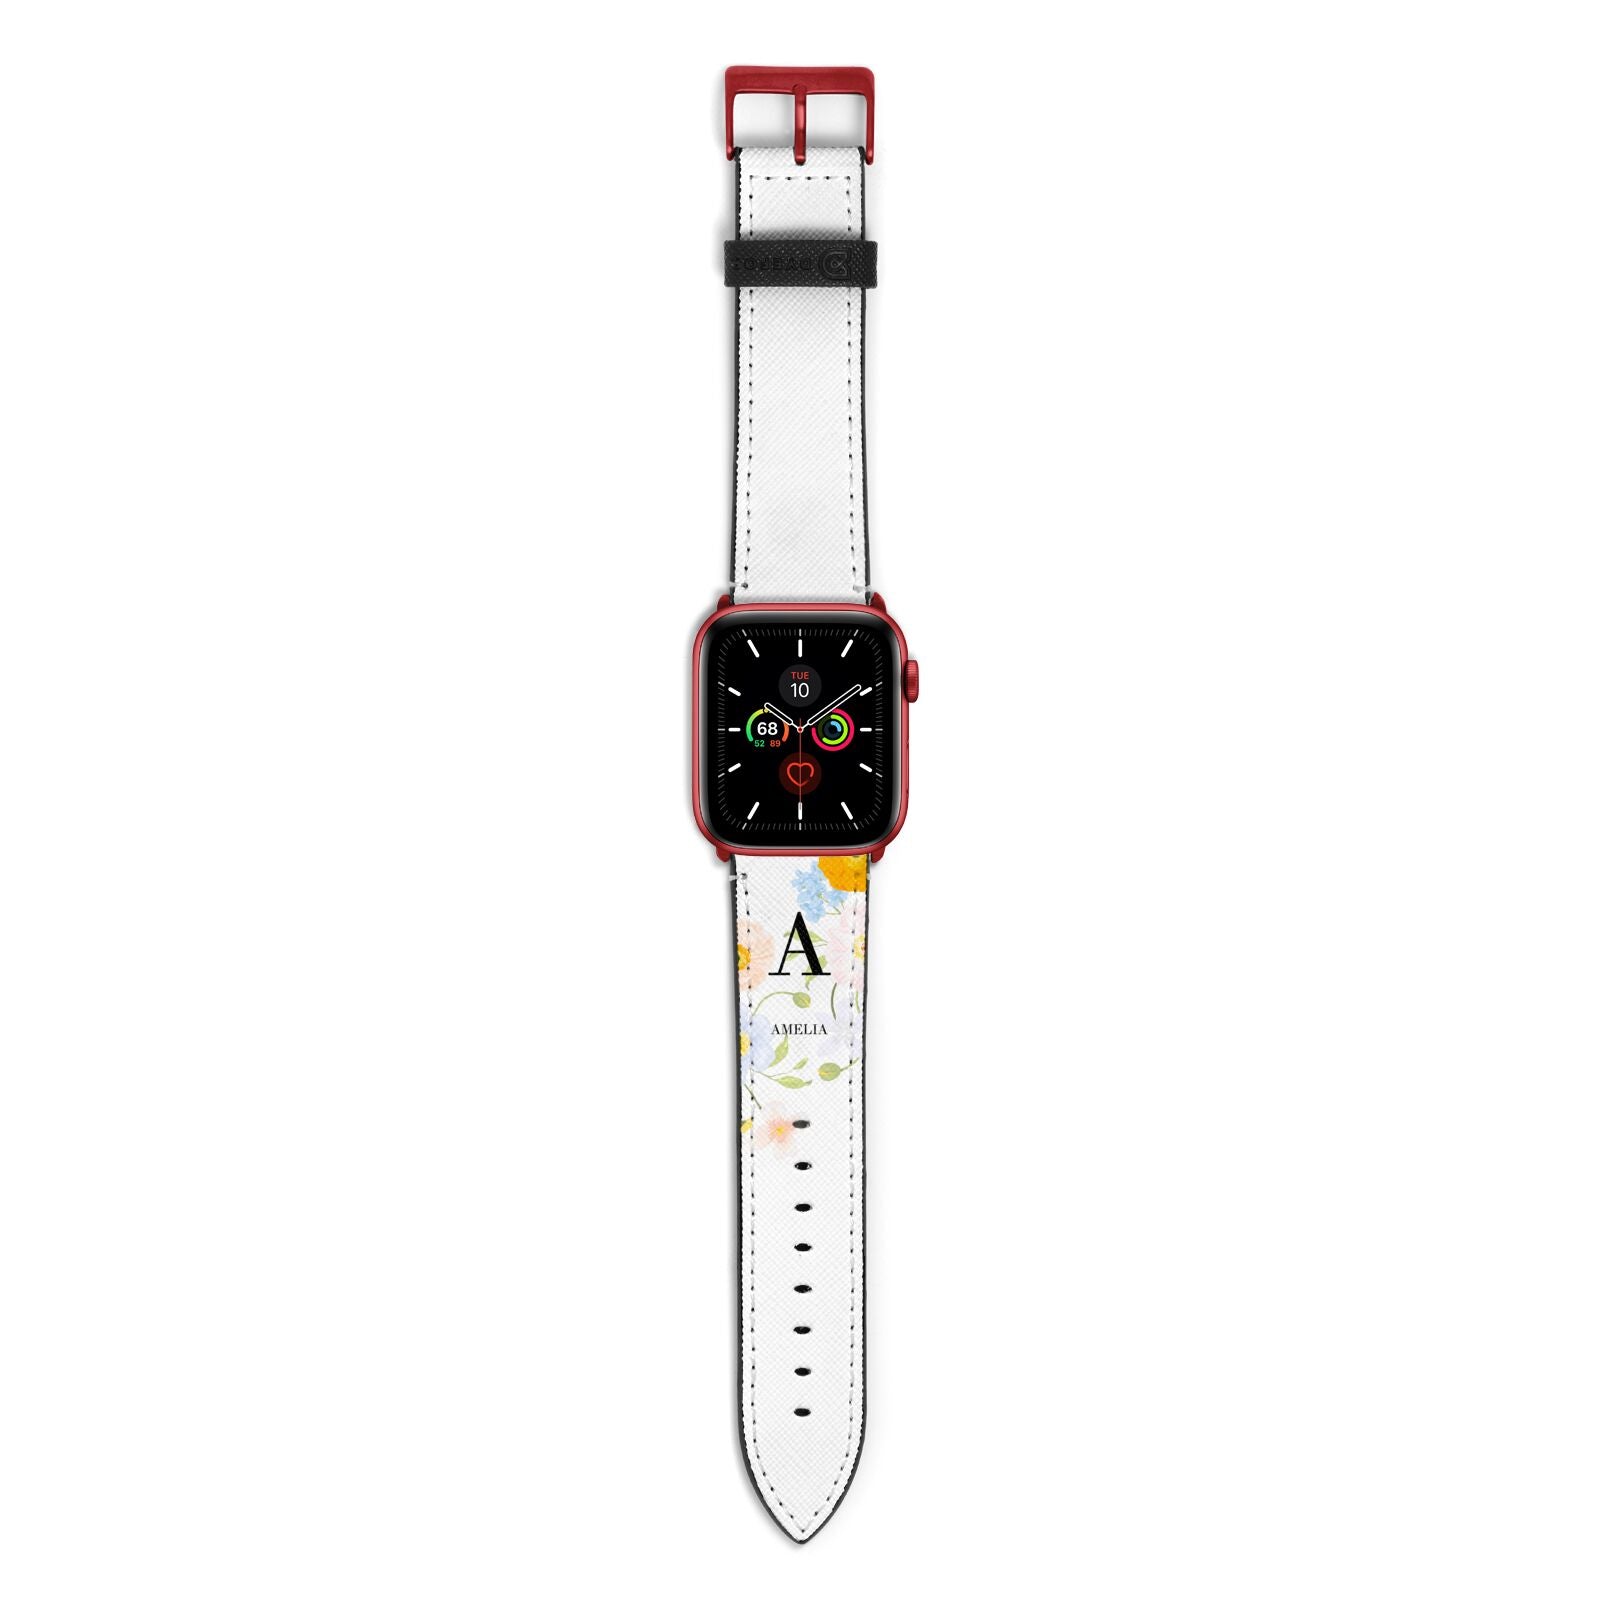 Customised Floral Apple Watch Strap with Red Hardware